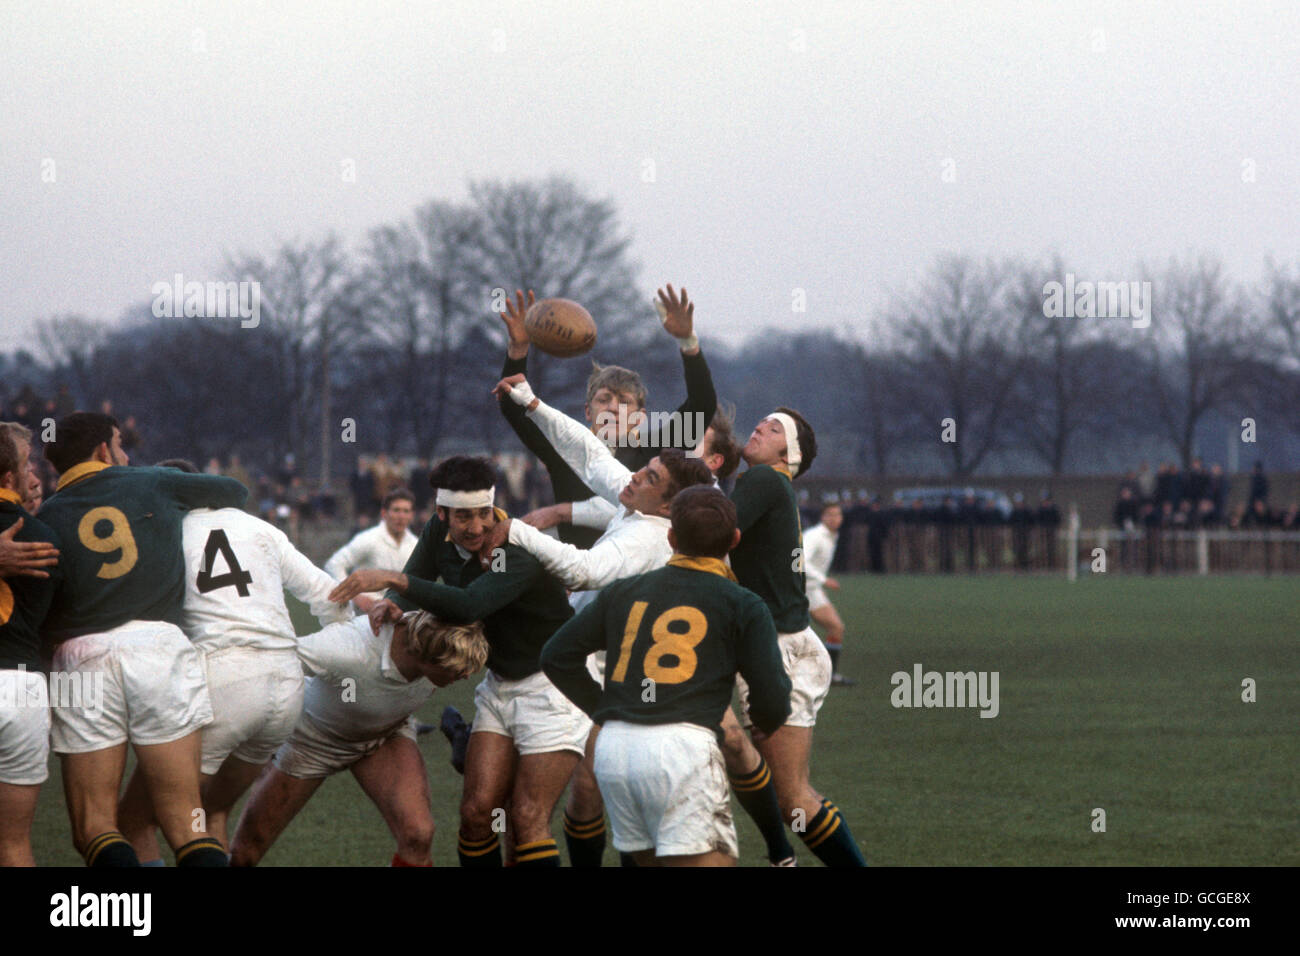 Rugby Union - South Africa Tour of Northern Hemisphere - Combined Services v South Africa - Aldershot. Albie Bates, South Africa, gets up for the ball in a line-out. Stock Photo